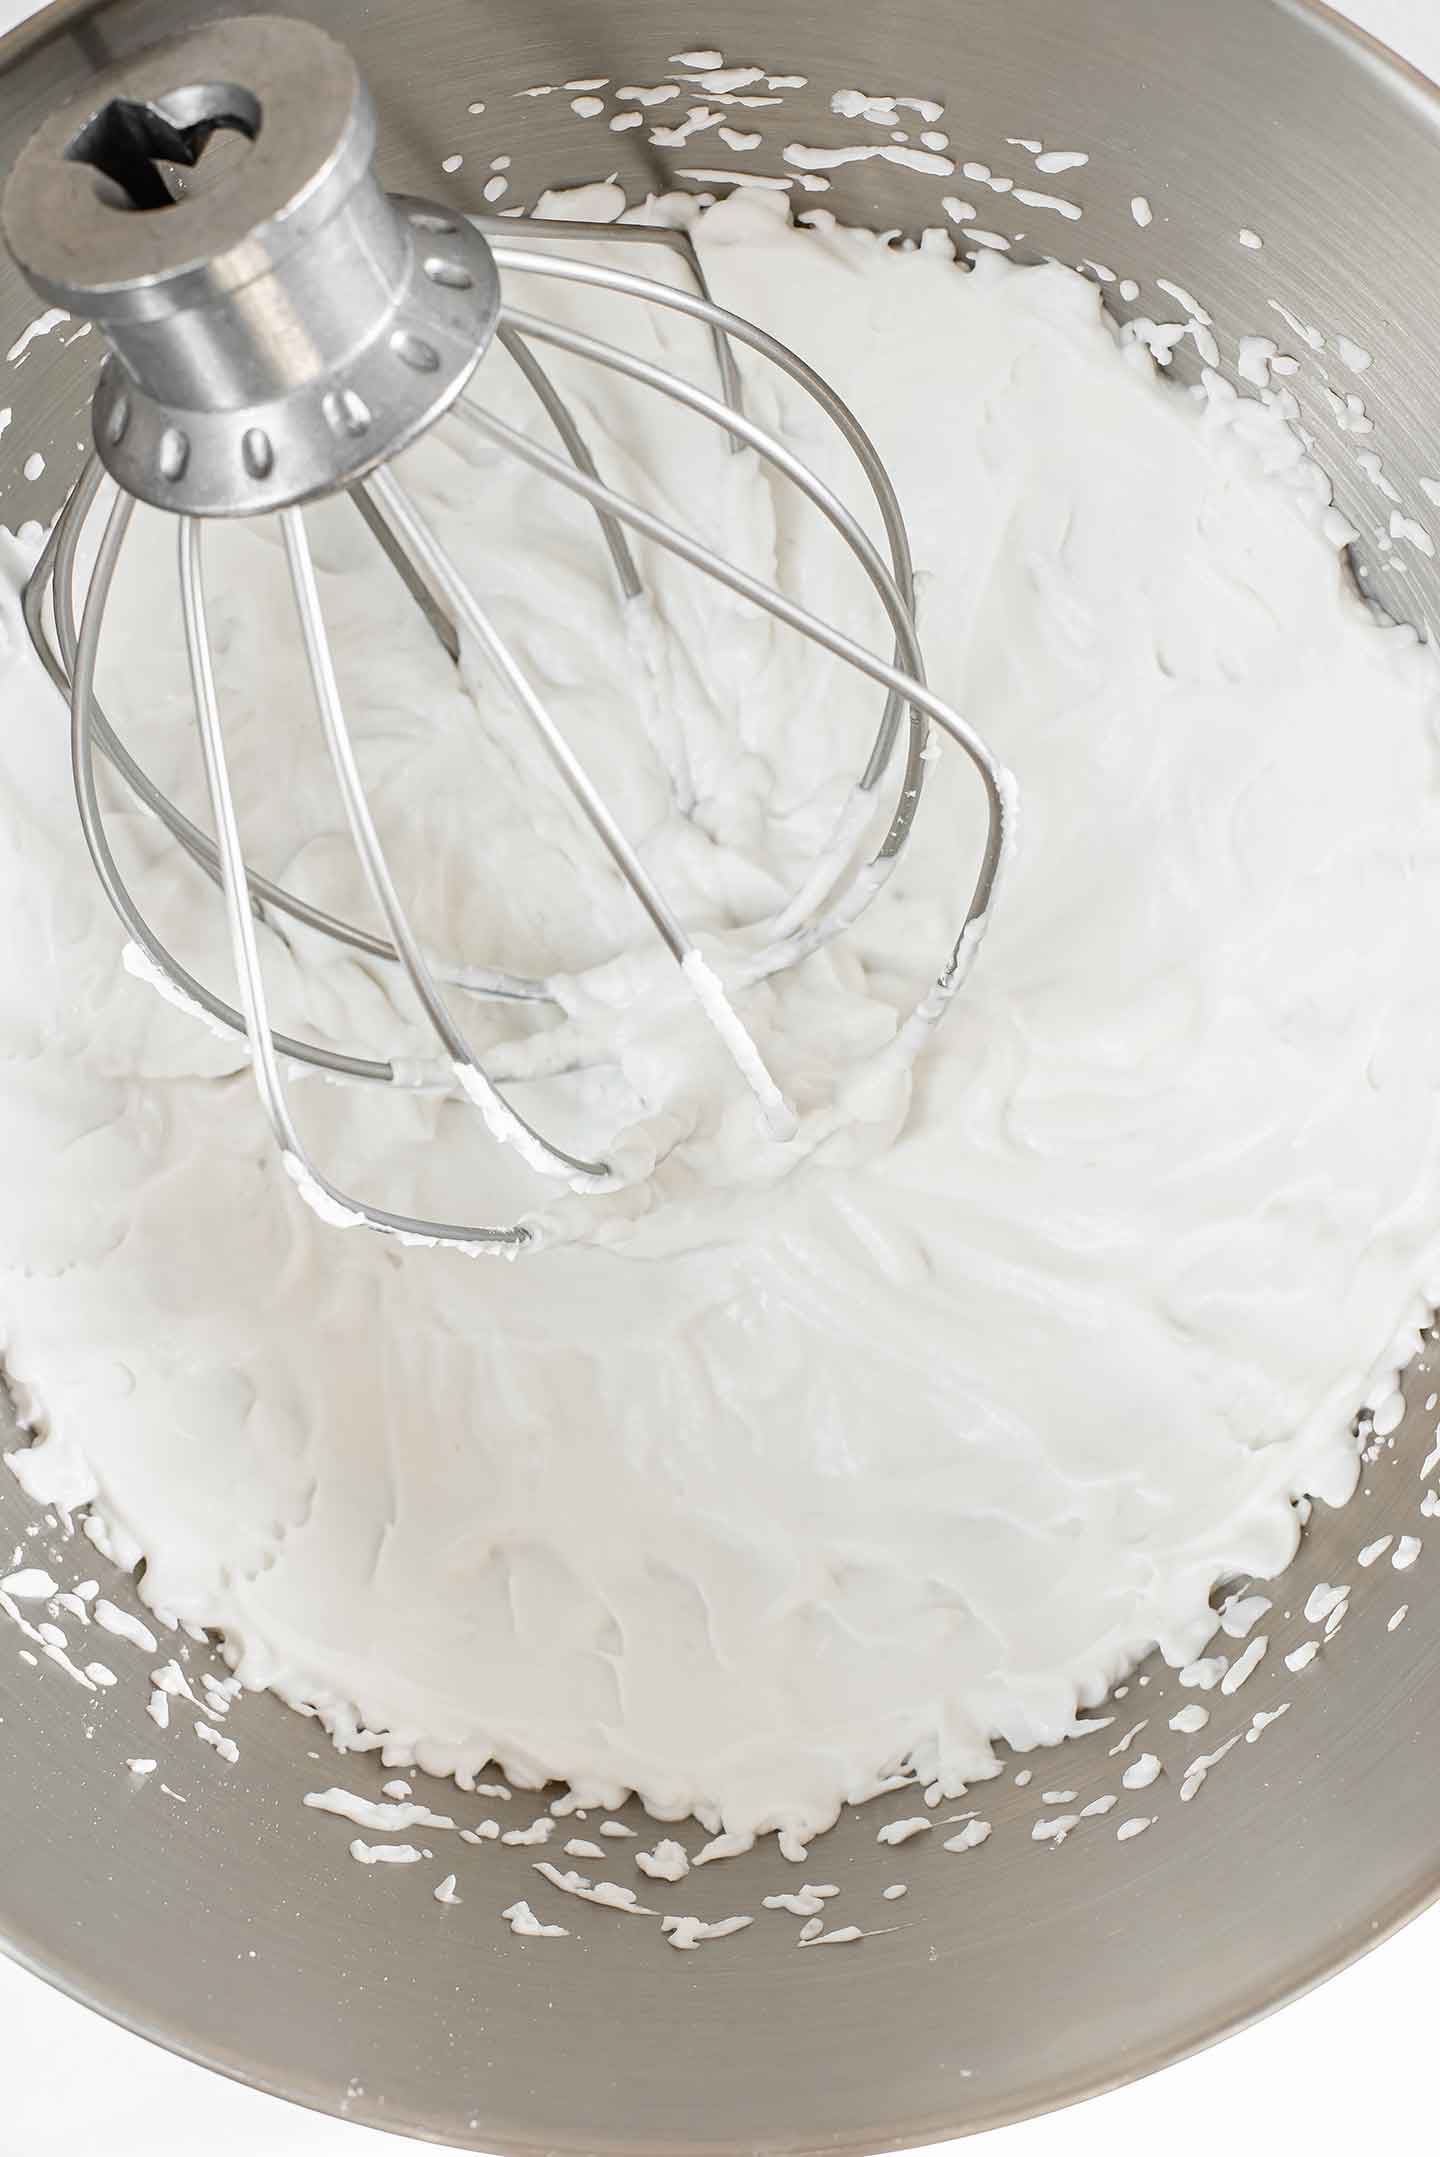 Top down view of coconut whipped cream in a metal mixing bowl with the whisk attachment in the cream